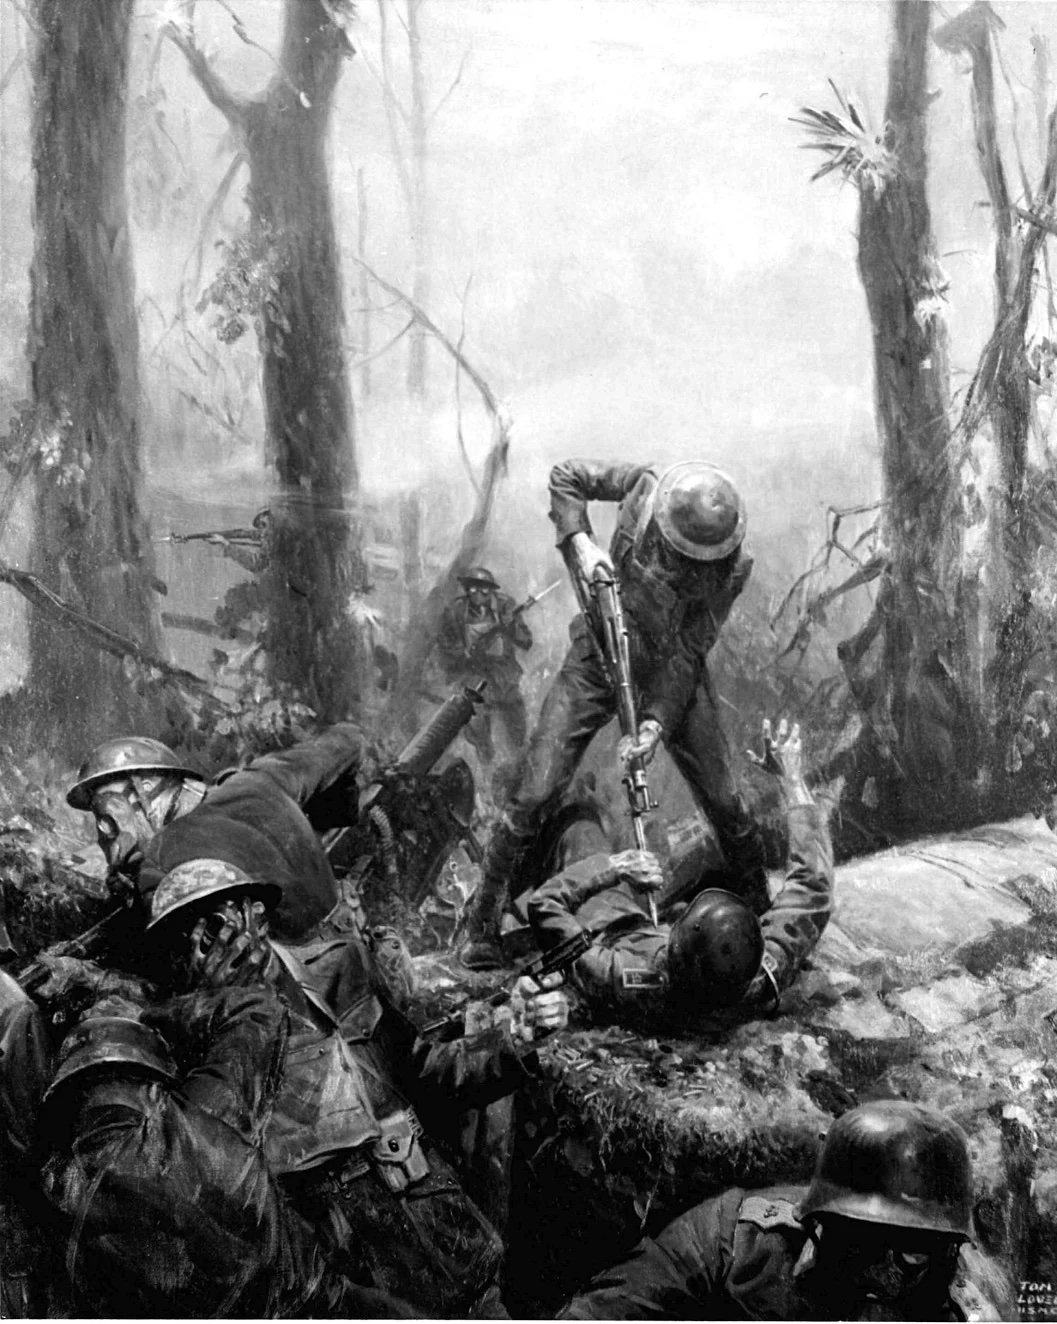 A painting by Sgt. Tom Lovell of the Second Division Marines at Belleau Wood. (USMC Archives)